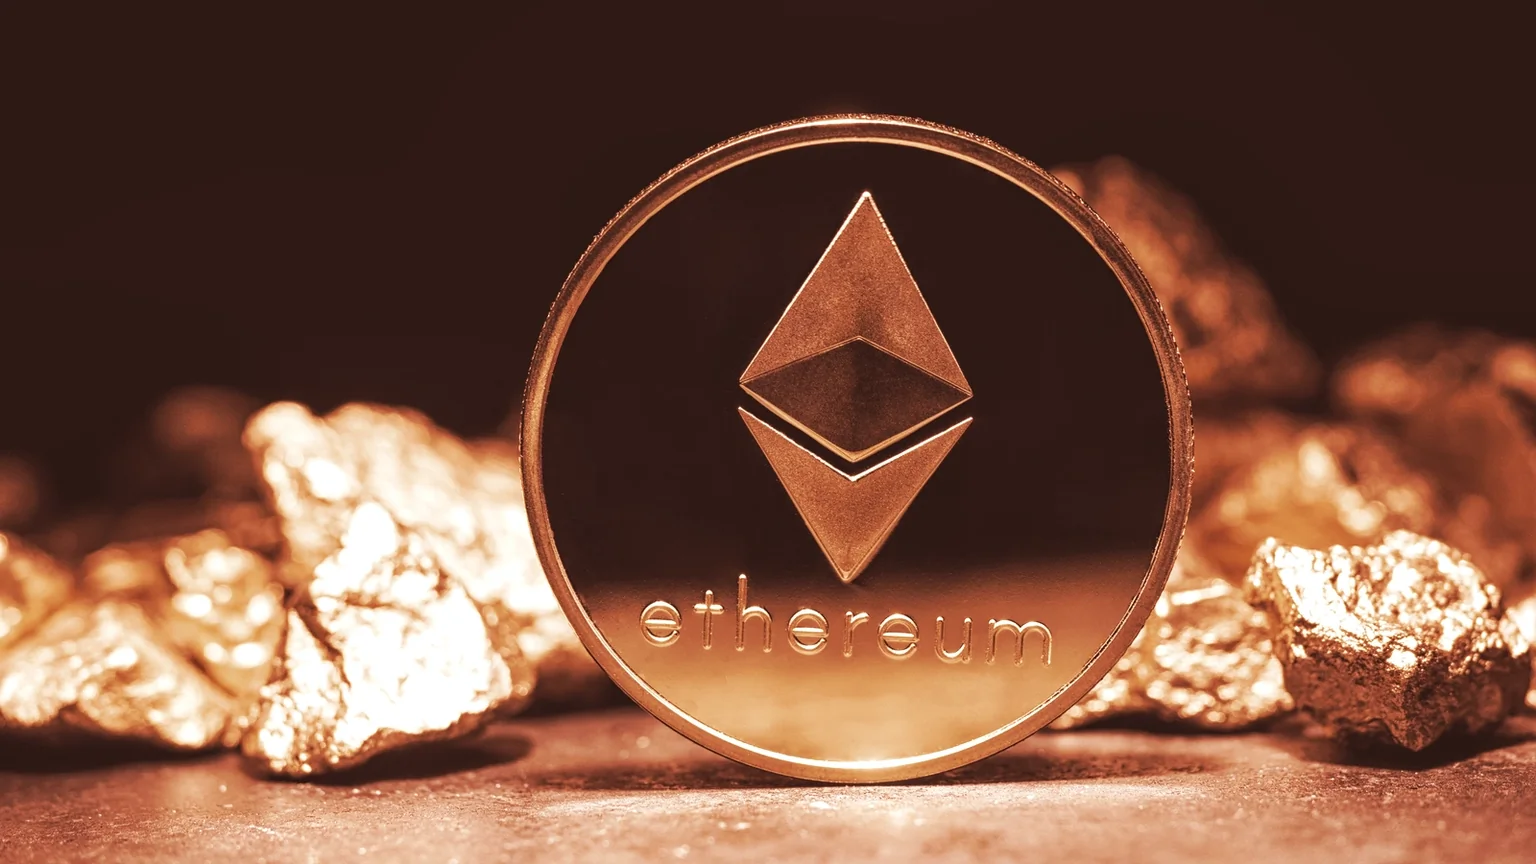 Ethereum miners have set a new revenue record. Image: Shutterstock